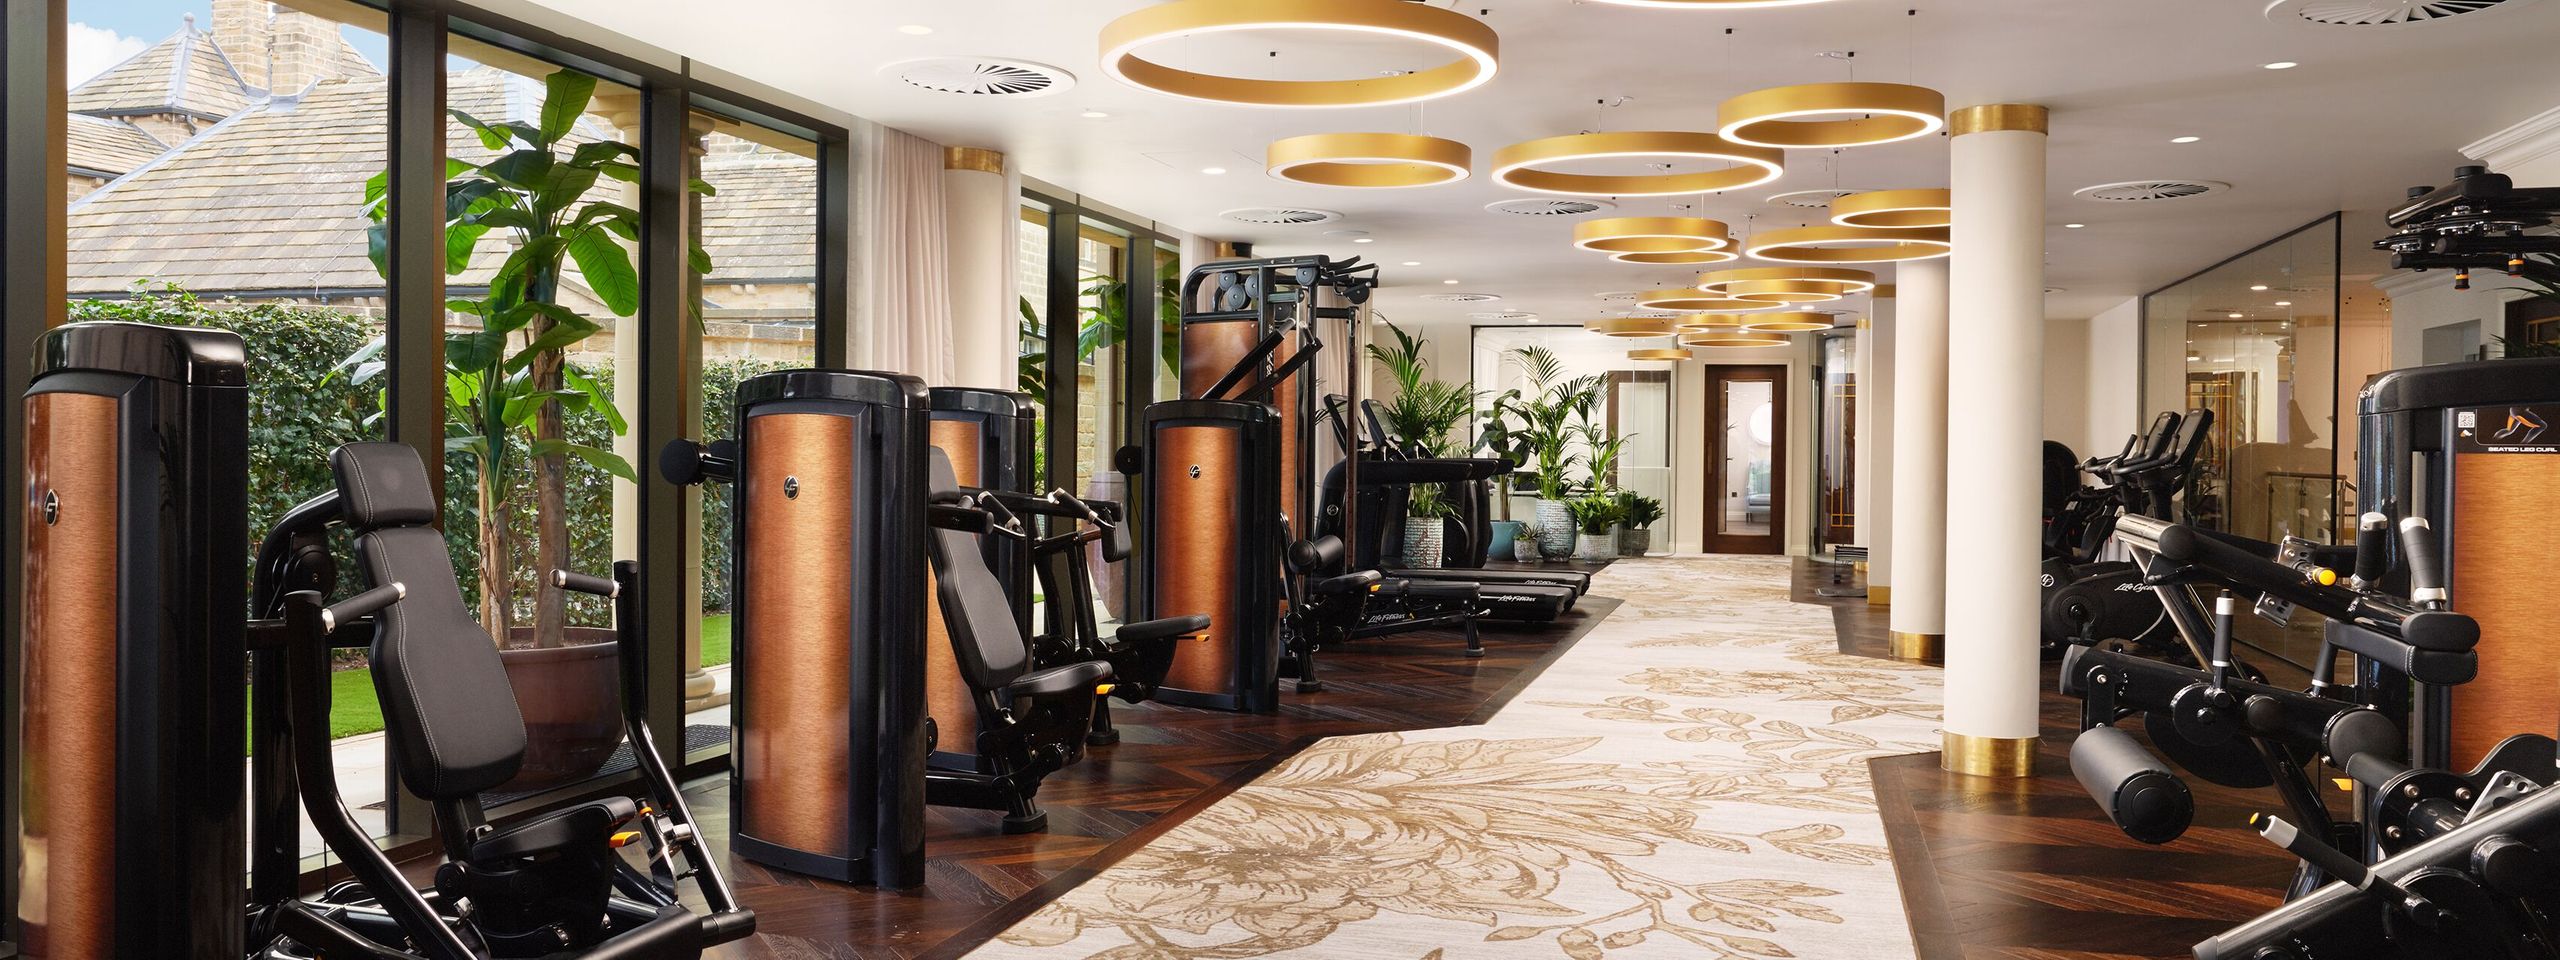 Hotel Exercise Machines / Hotel Fitness Training Solutions / Hotel Gym Facilities